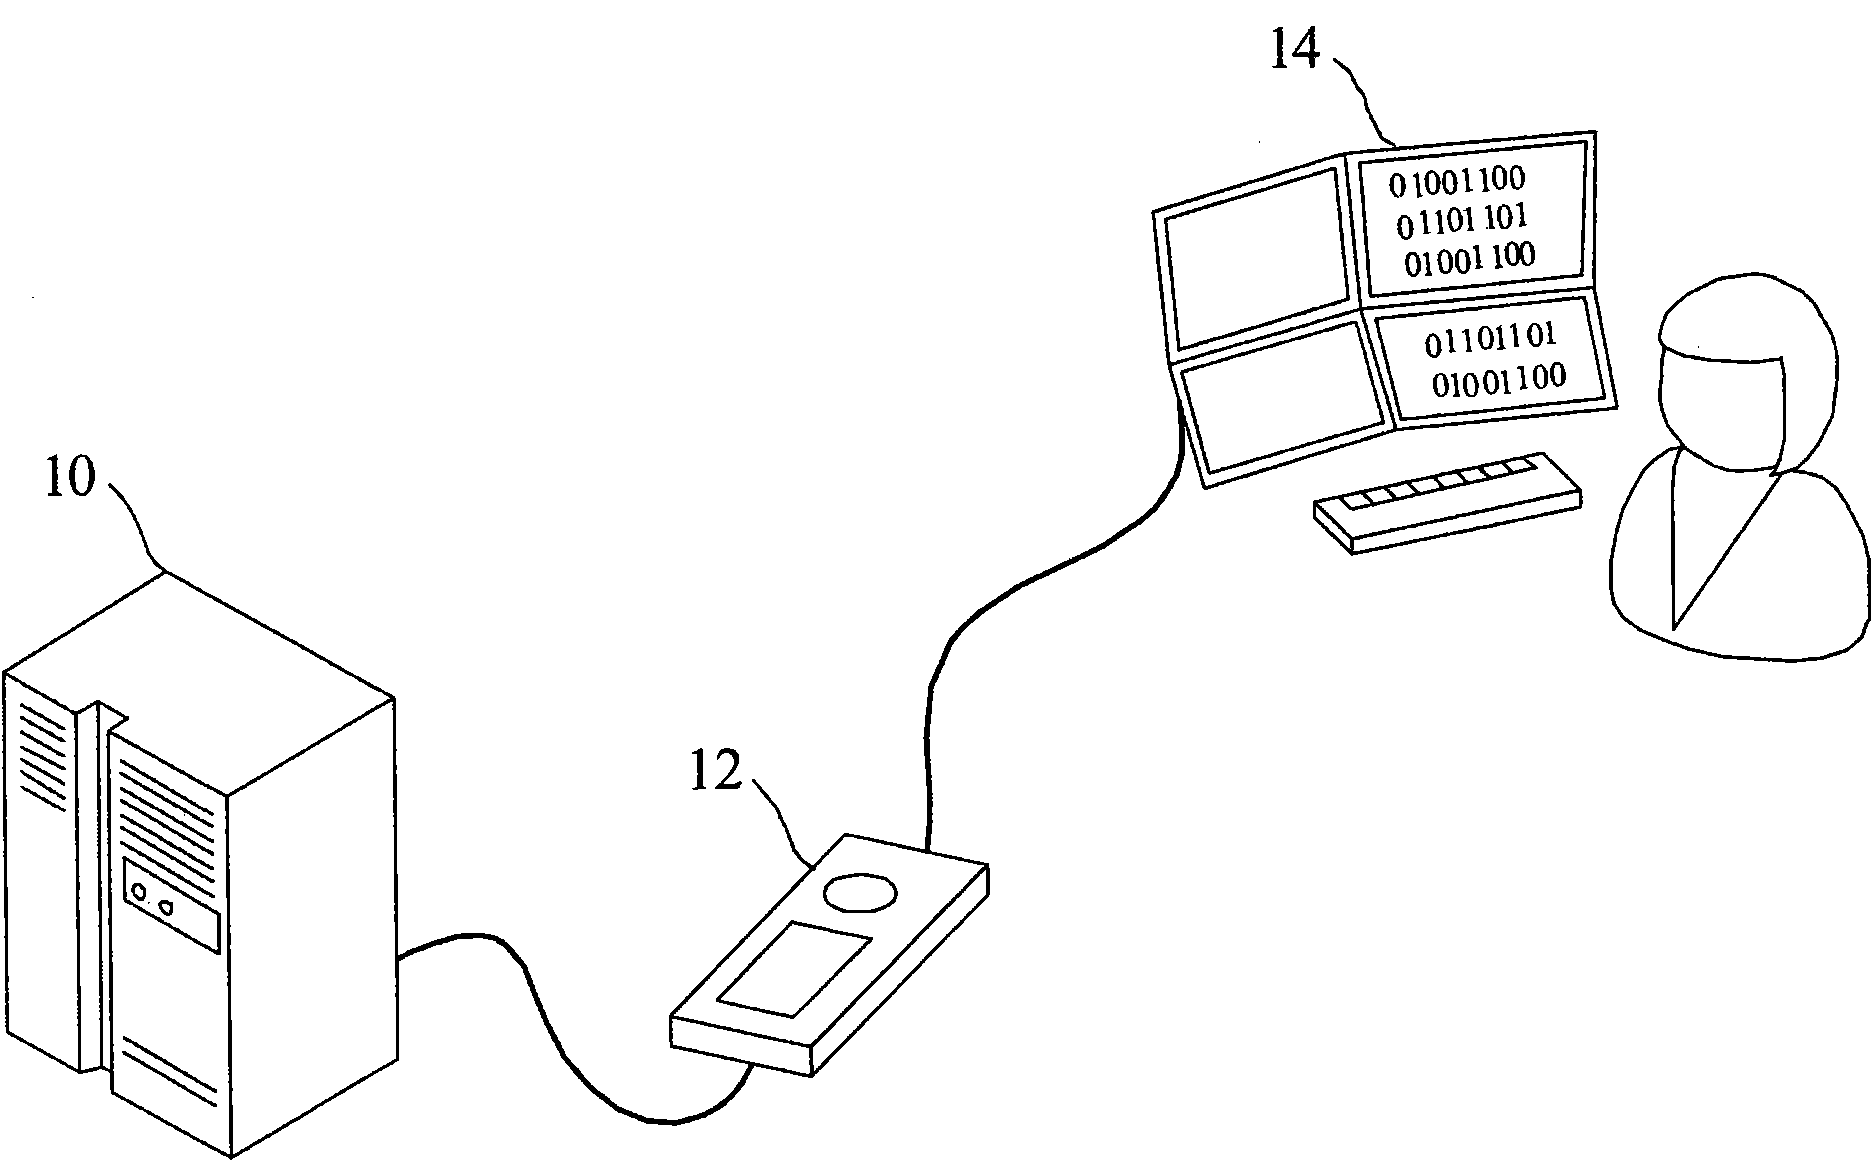 Remote hardware detection system and method